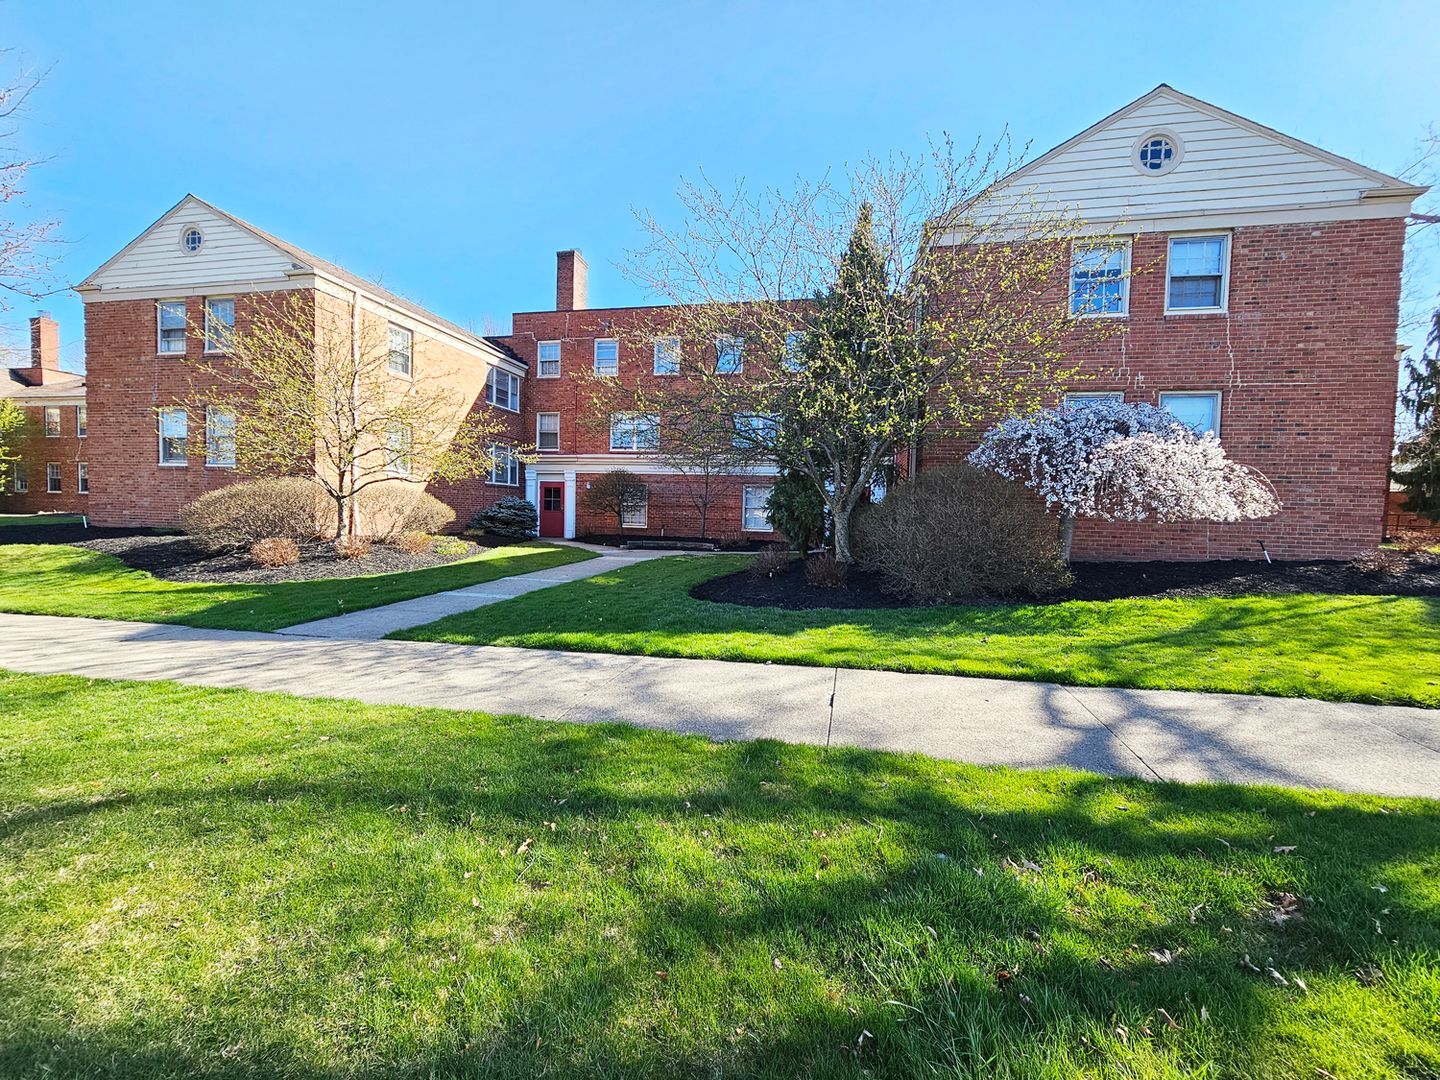 2 Bed and 1 Bath Apartments for Rent in Shaker Heights | Newly Renovated Image